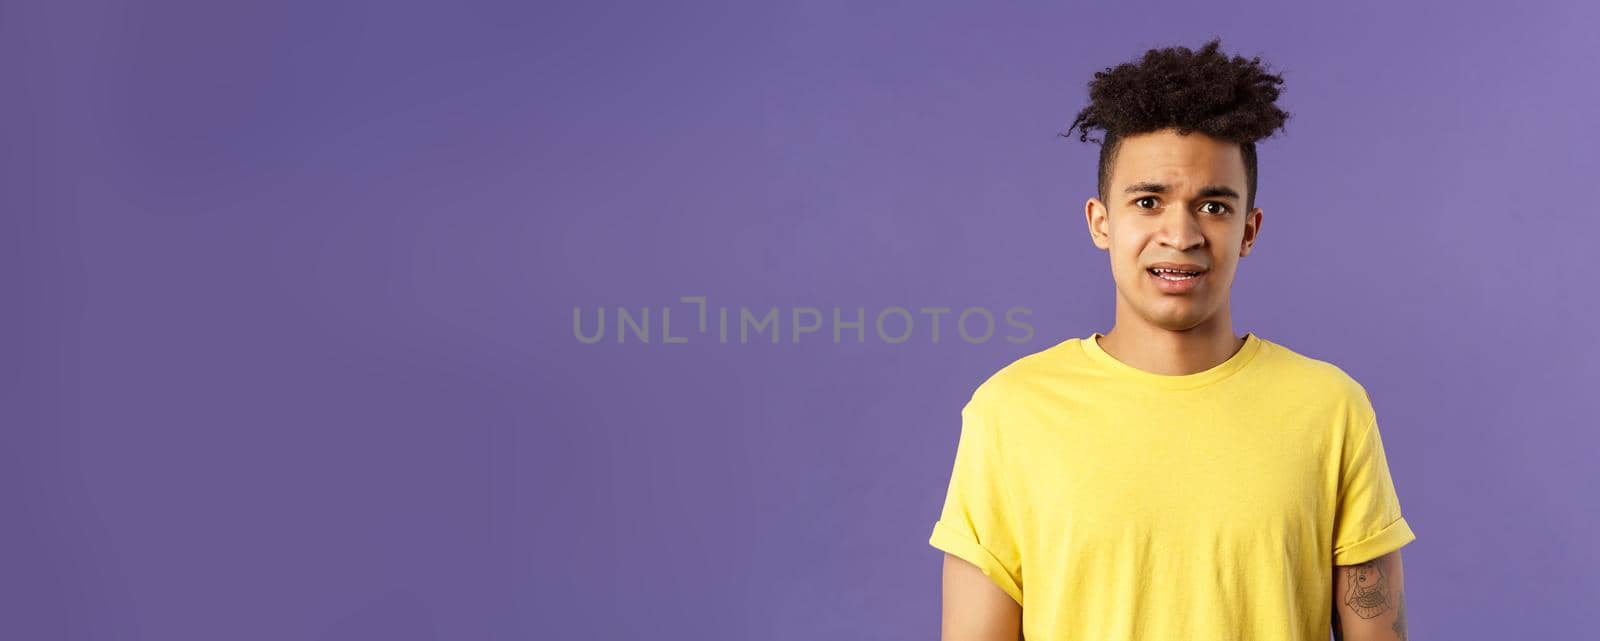 Waist-up portrait of young concerned hispanic man with worried gaze looking at camera, frowning being scared for friend stuck in troublesome situation, want help, stand purple background.